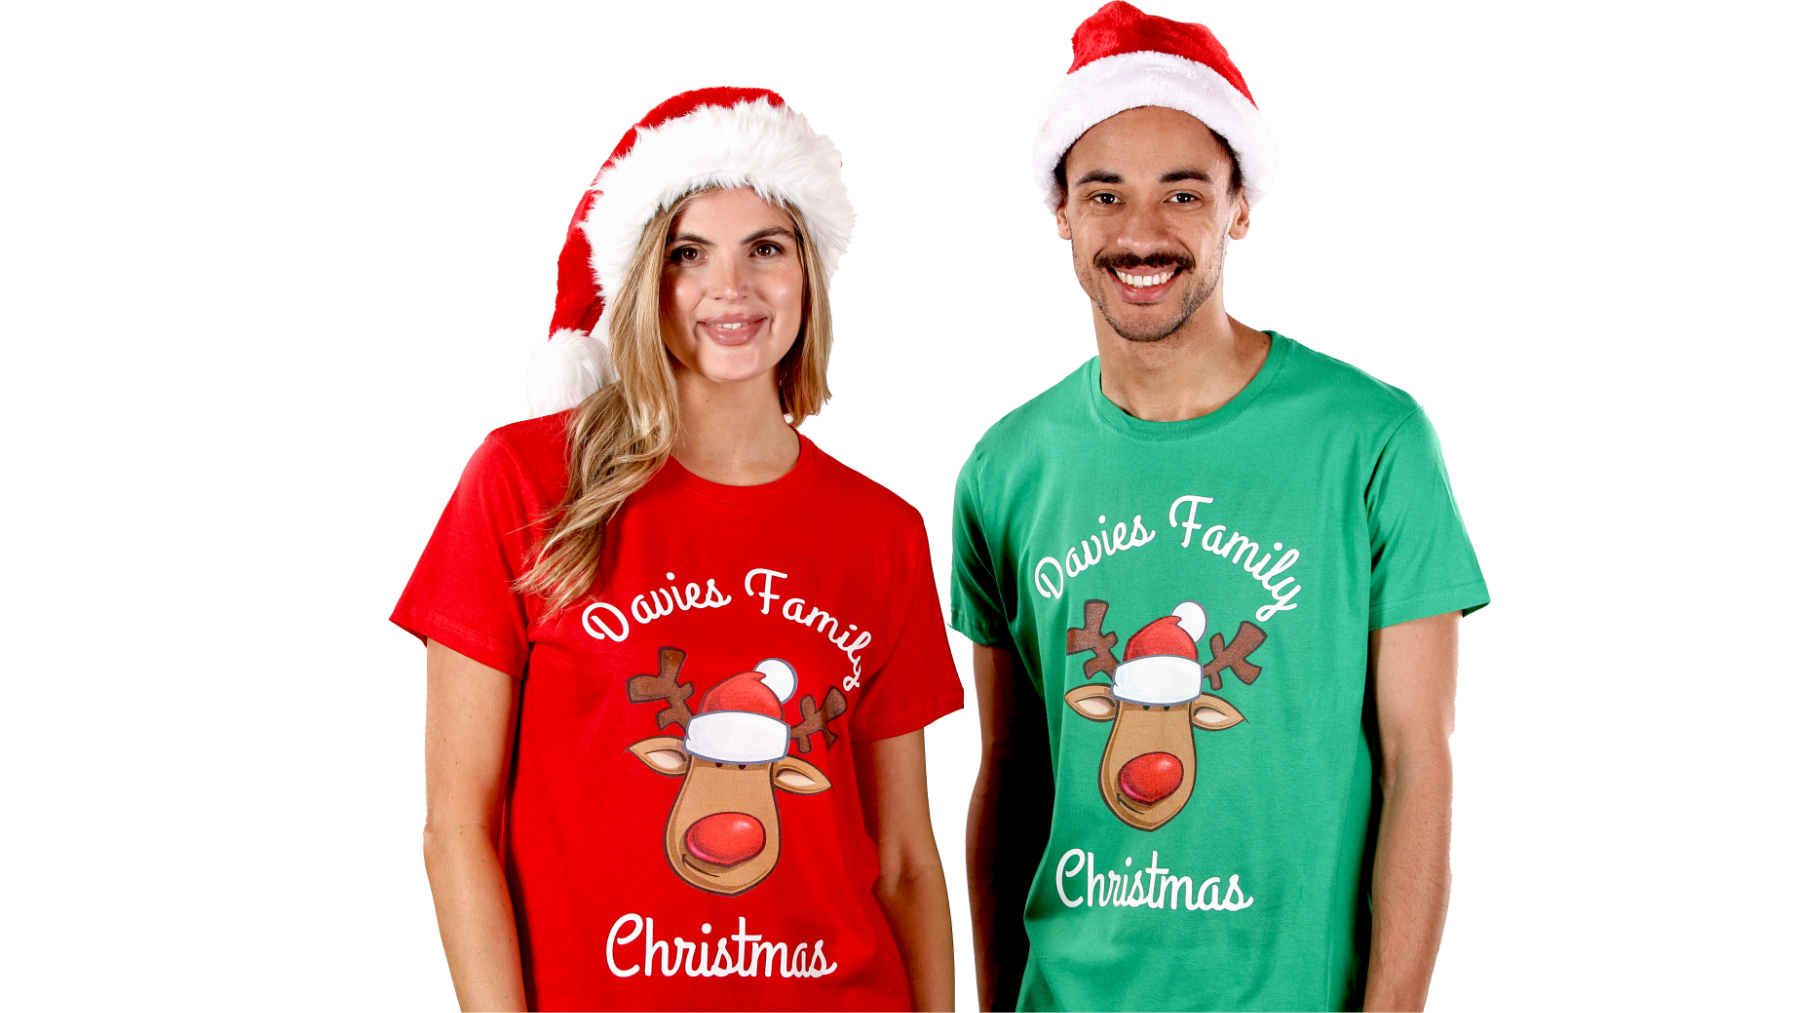 Personalised Christmas Clothing & Presents